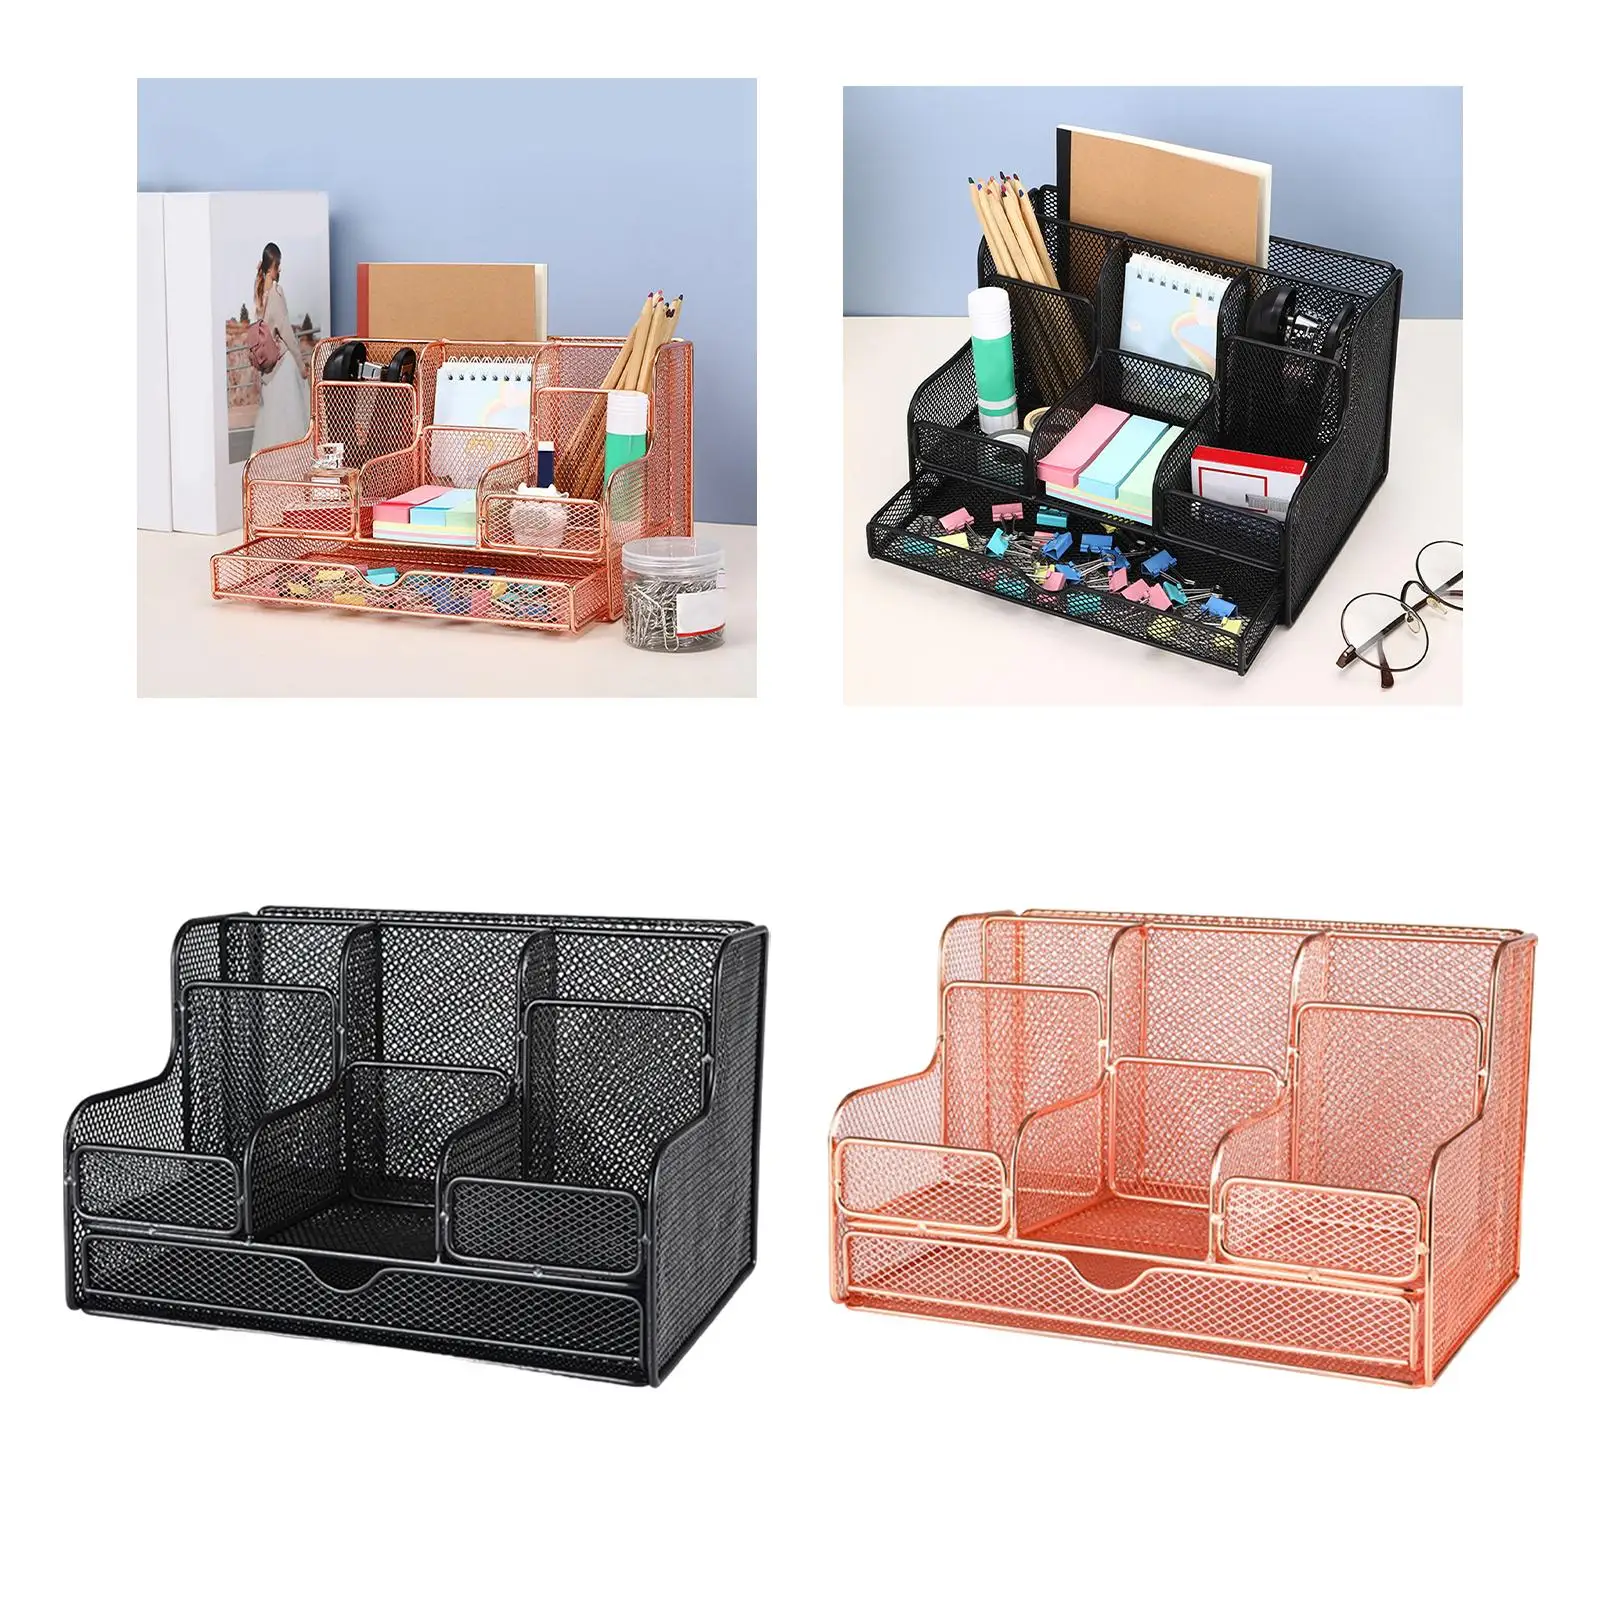 Mesh Desk Organizer, Pencil Holder Sticky Notes Office Supply Storage Caddy Mesh Office Organization for Home Workshop Office